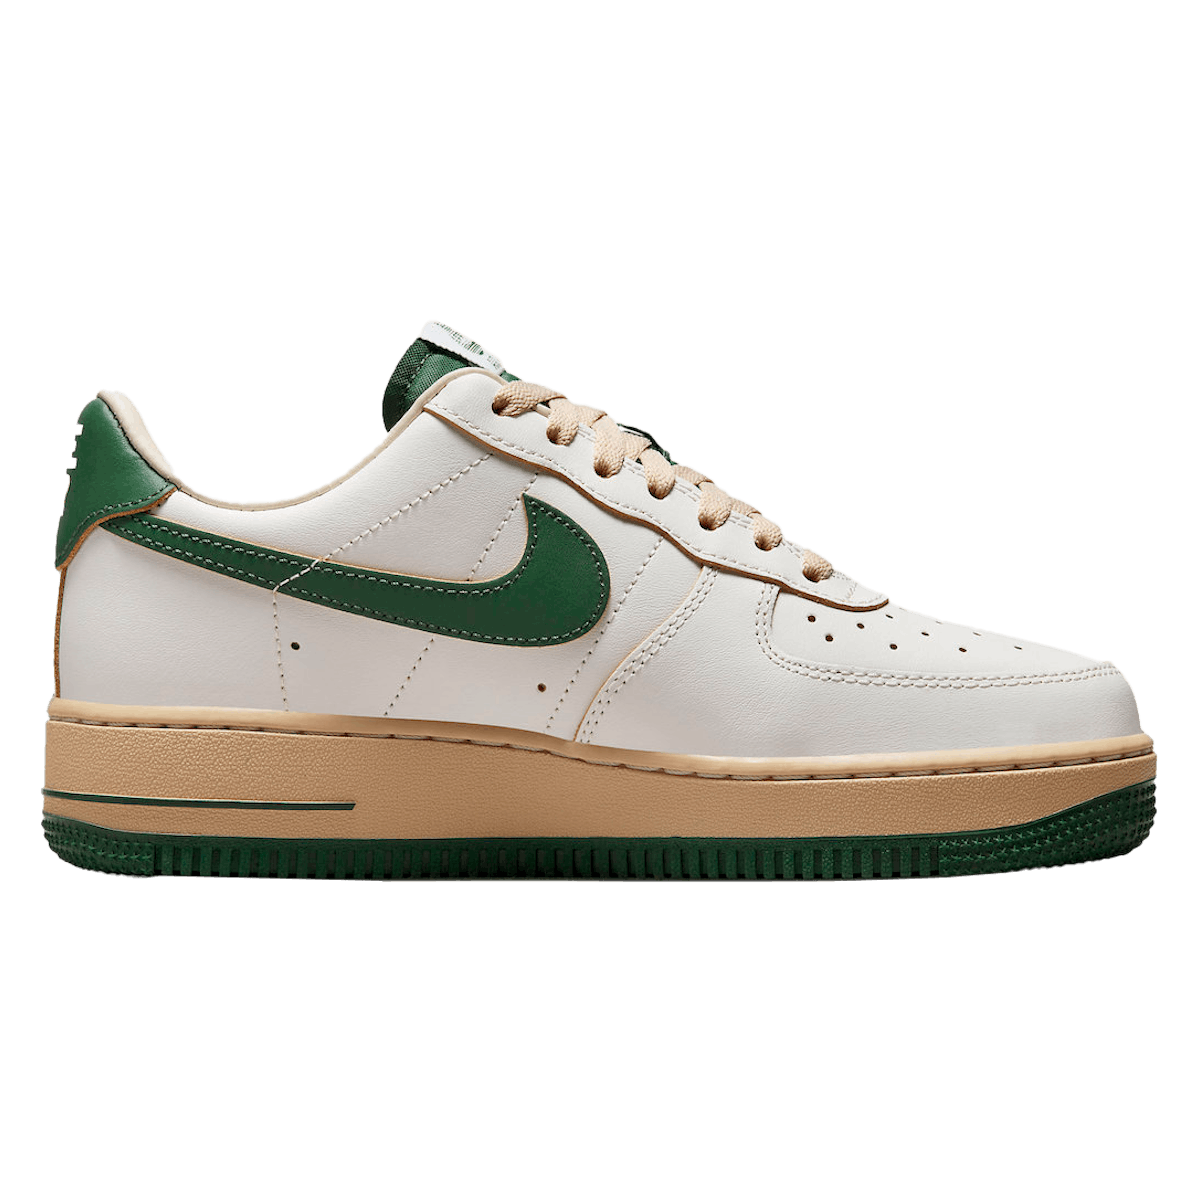 Nike Air Force 1 Low Wmns "Gorge Green"